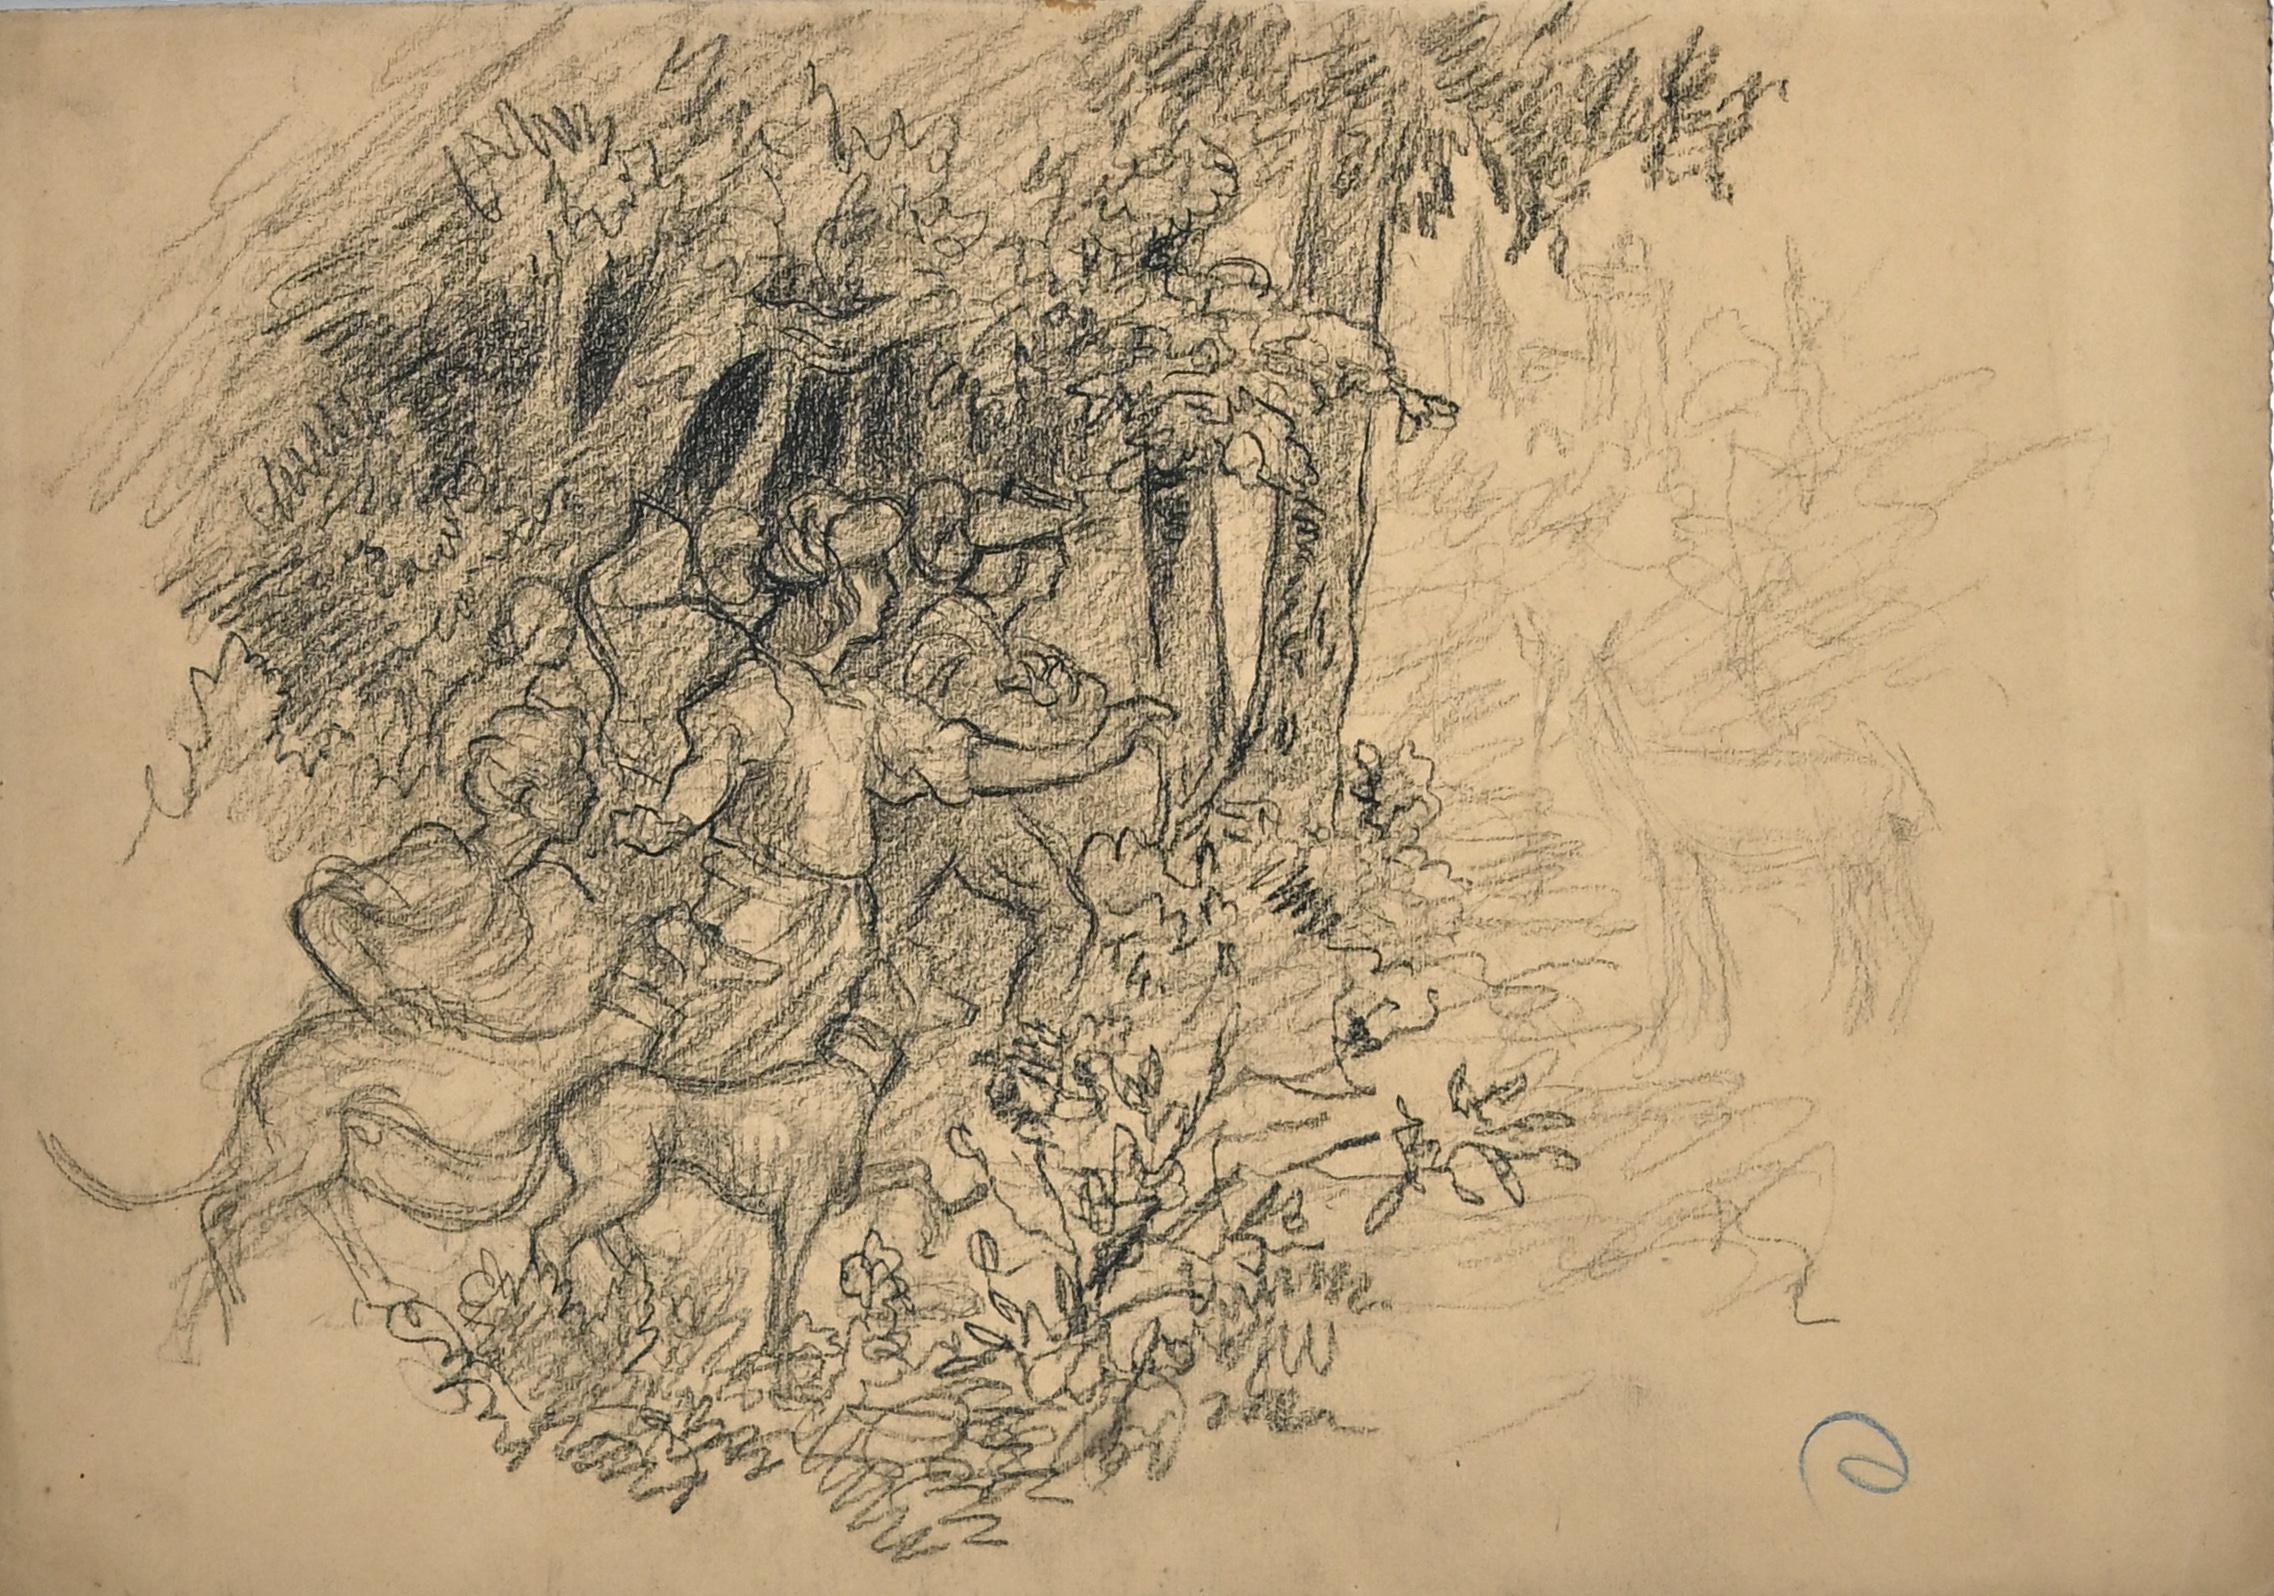 Into the Wood is an Original Pencil Drawing realized by Maurice Chabas (1862-1947).

The artwork is in good condition.

Maurice Chabas (21 September 1862, Nantes – 11 December 1947, Versailles) was a French Symbolist painter. Chabas was a prolific